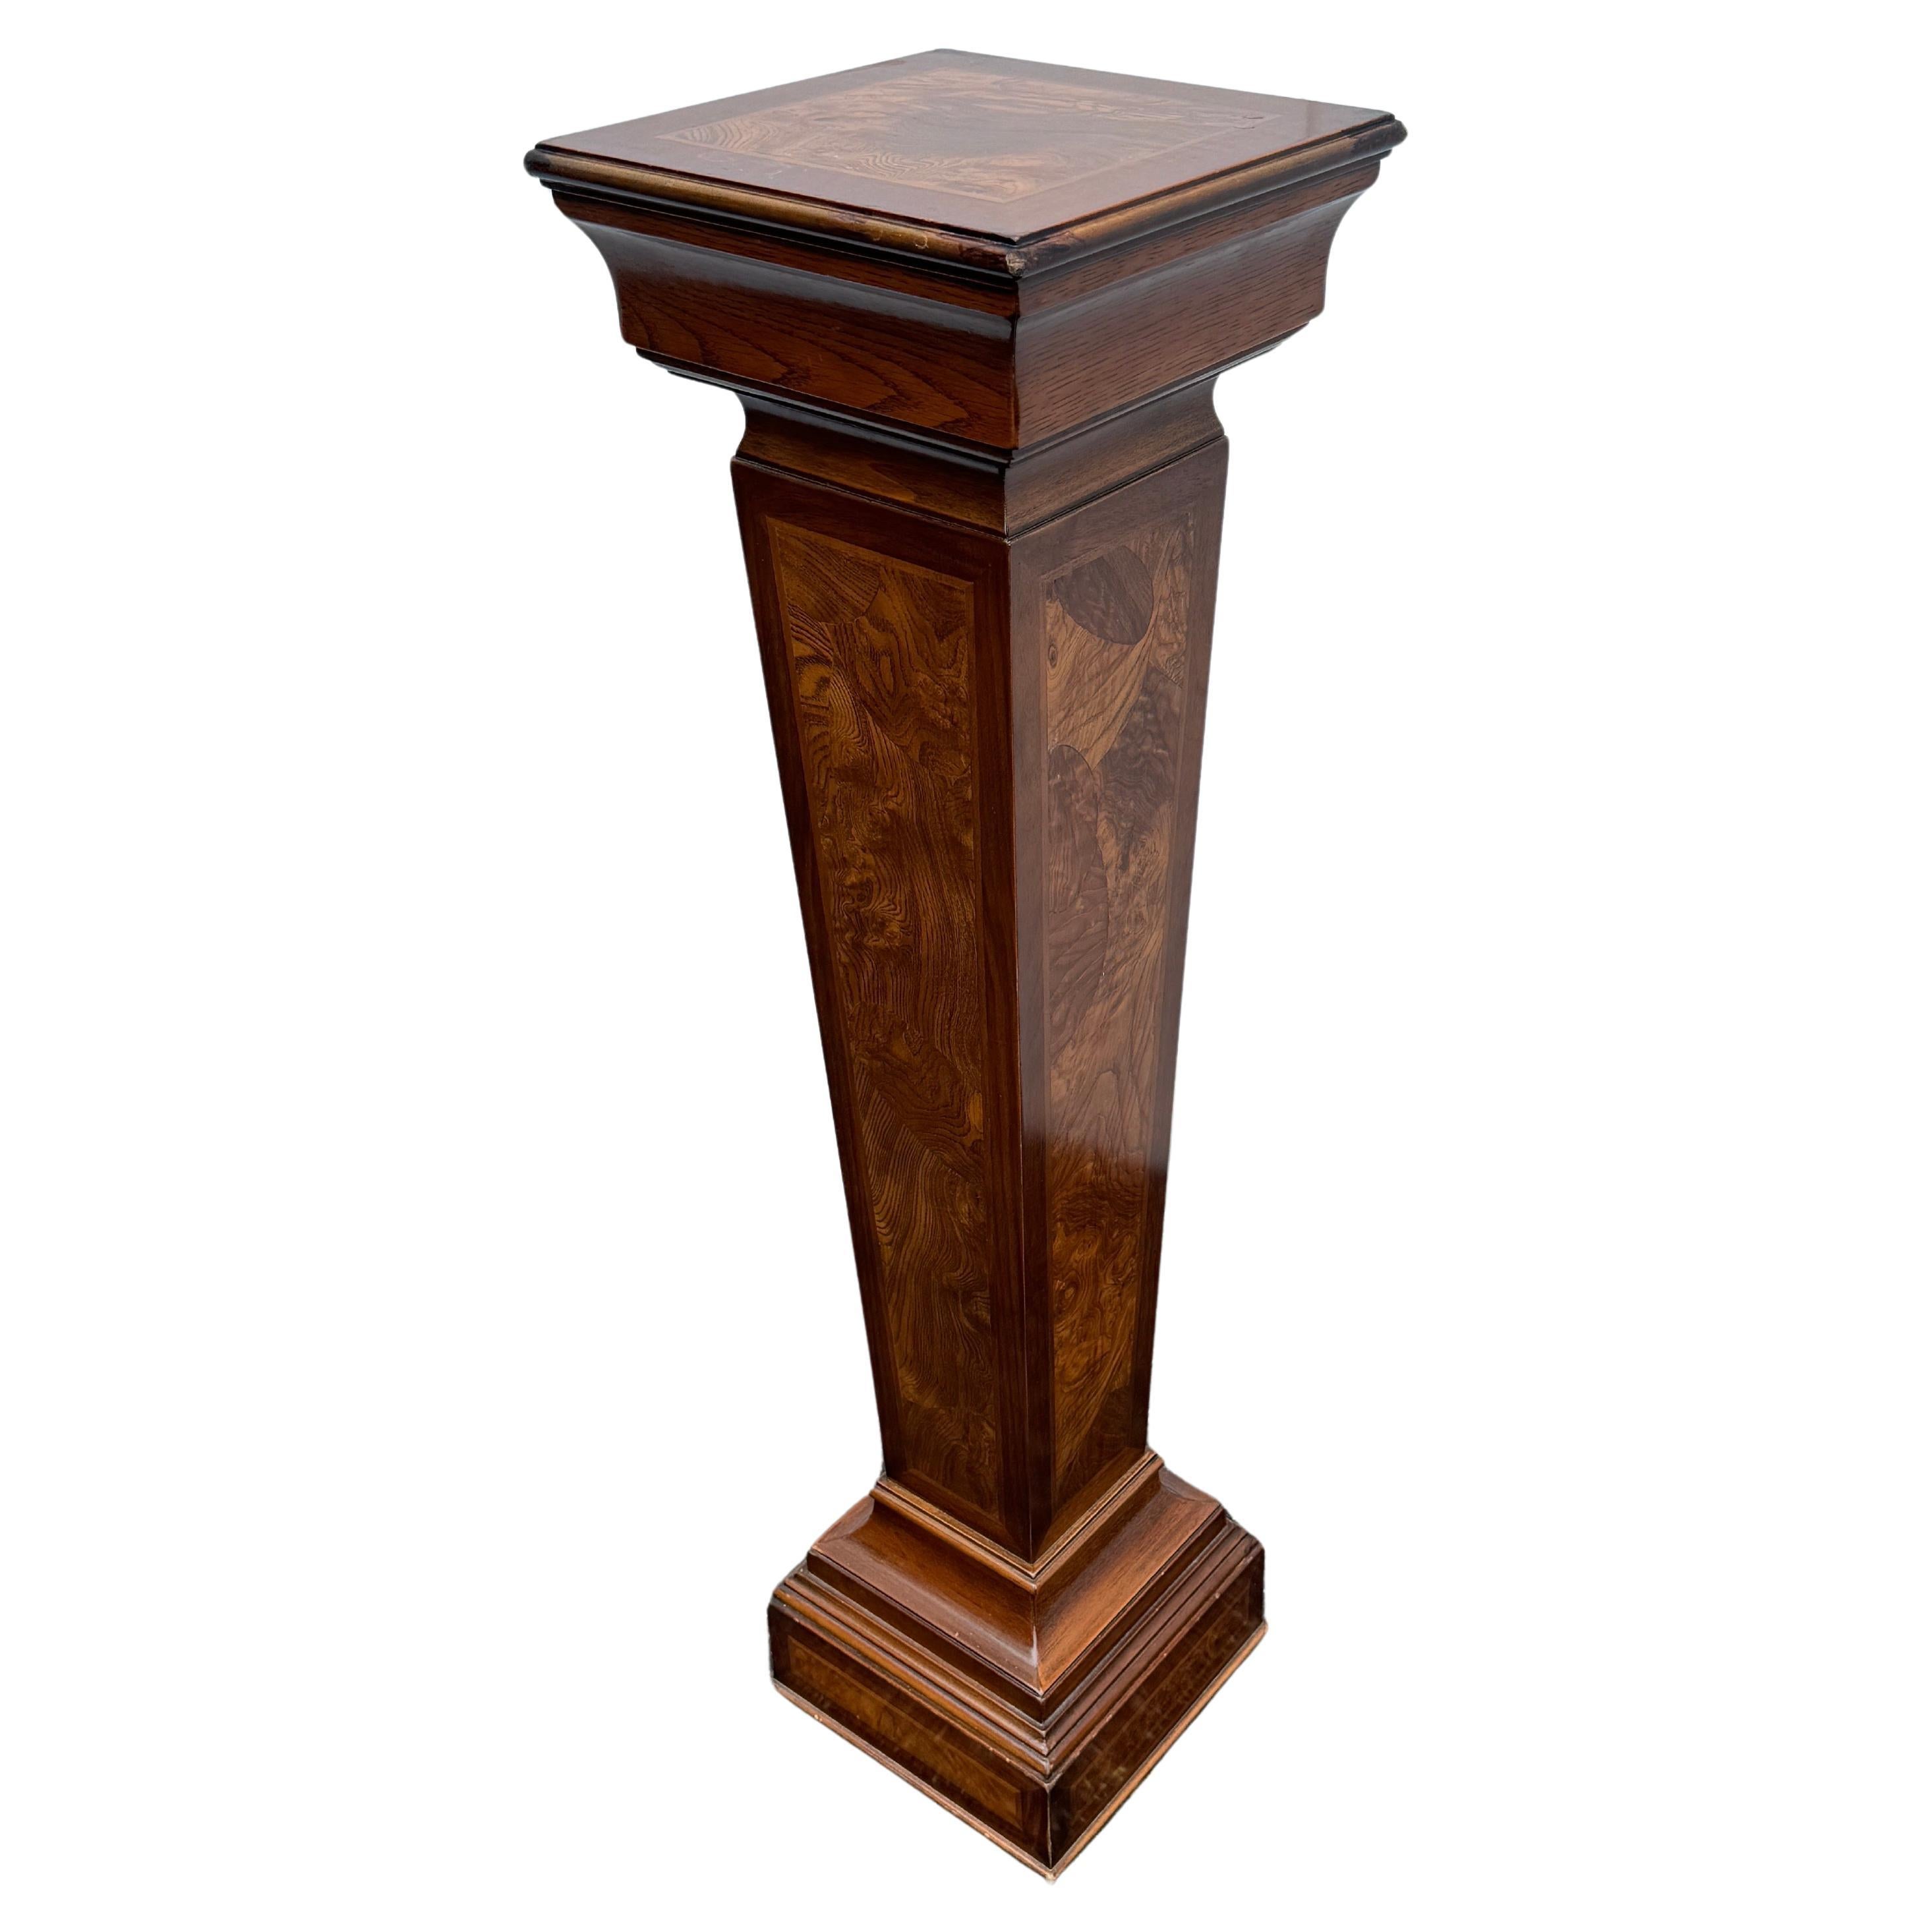 Italian Burl Wood Tapered Pedestal Stand In Good Condition For Sale In Haddonfield, NJ